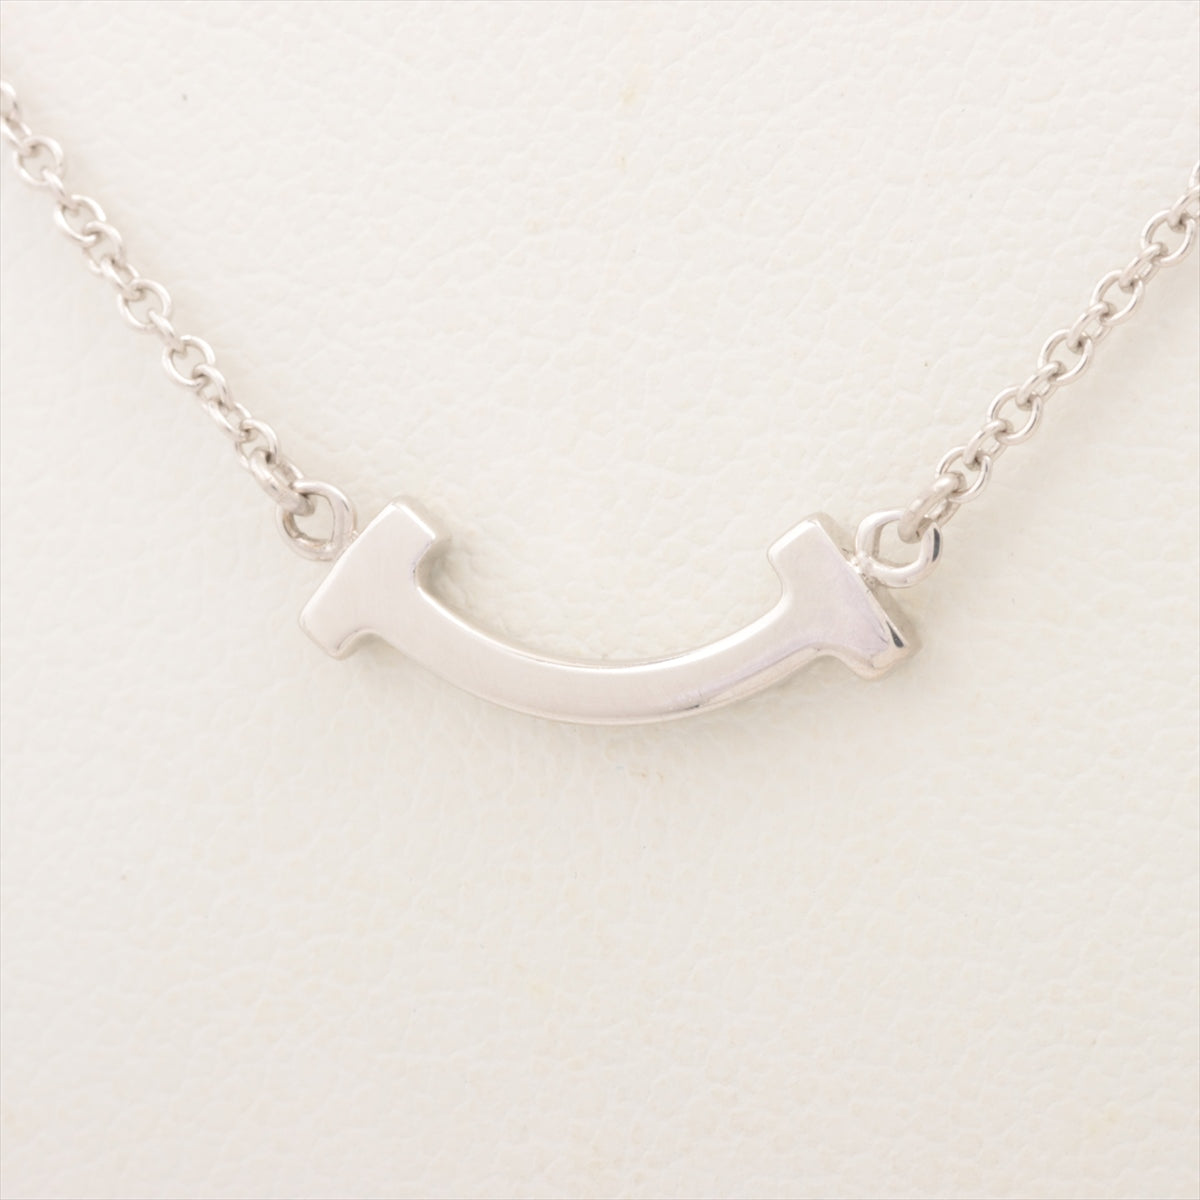 Diamond Crescent Moon Necklace in White, Yellow or Rose Gold